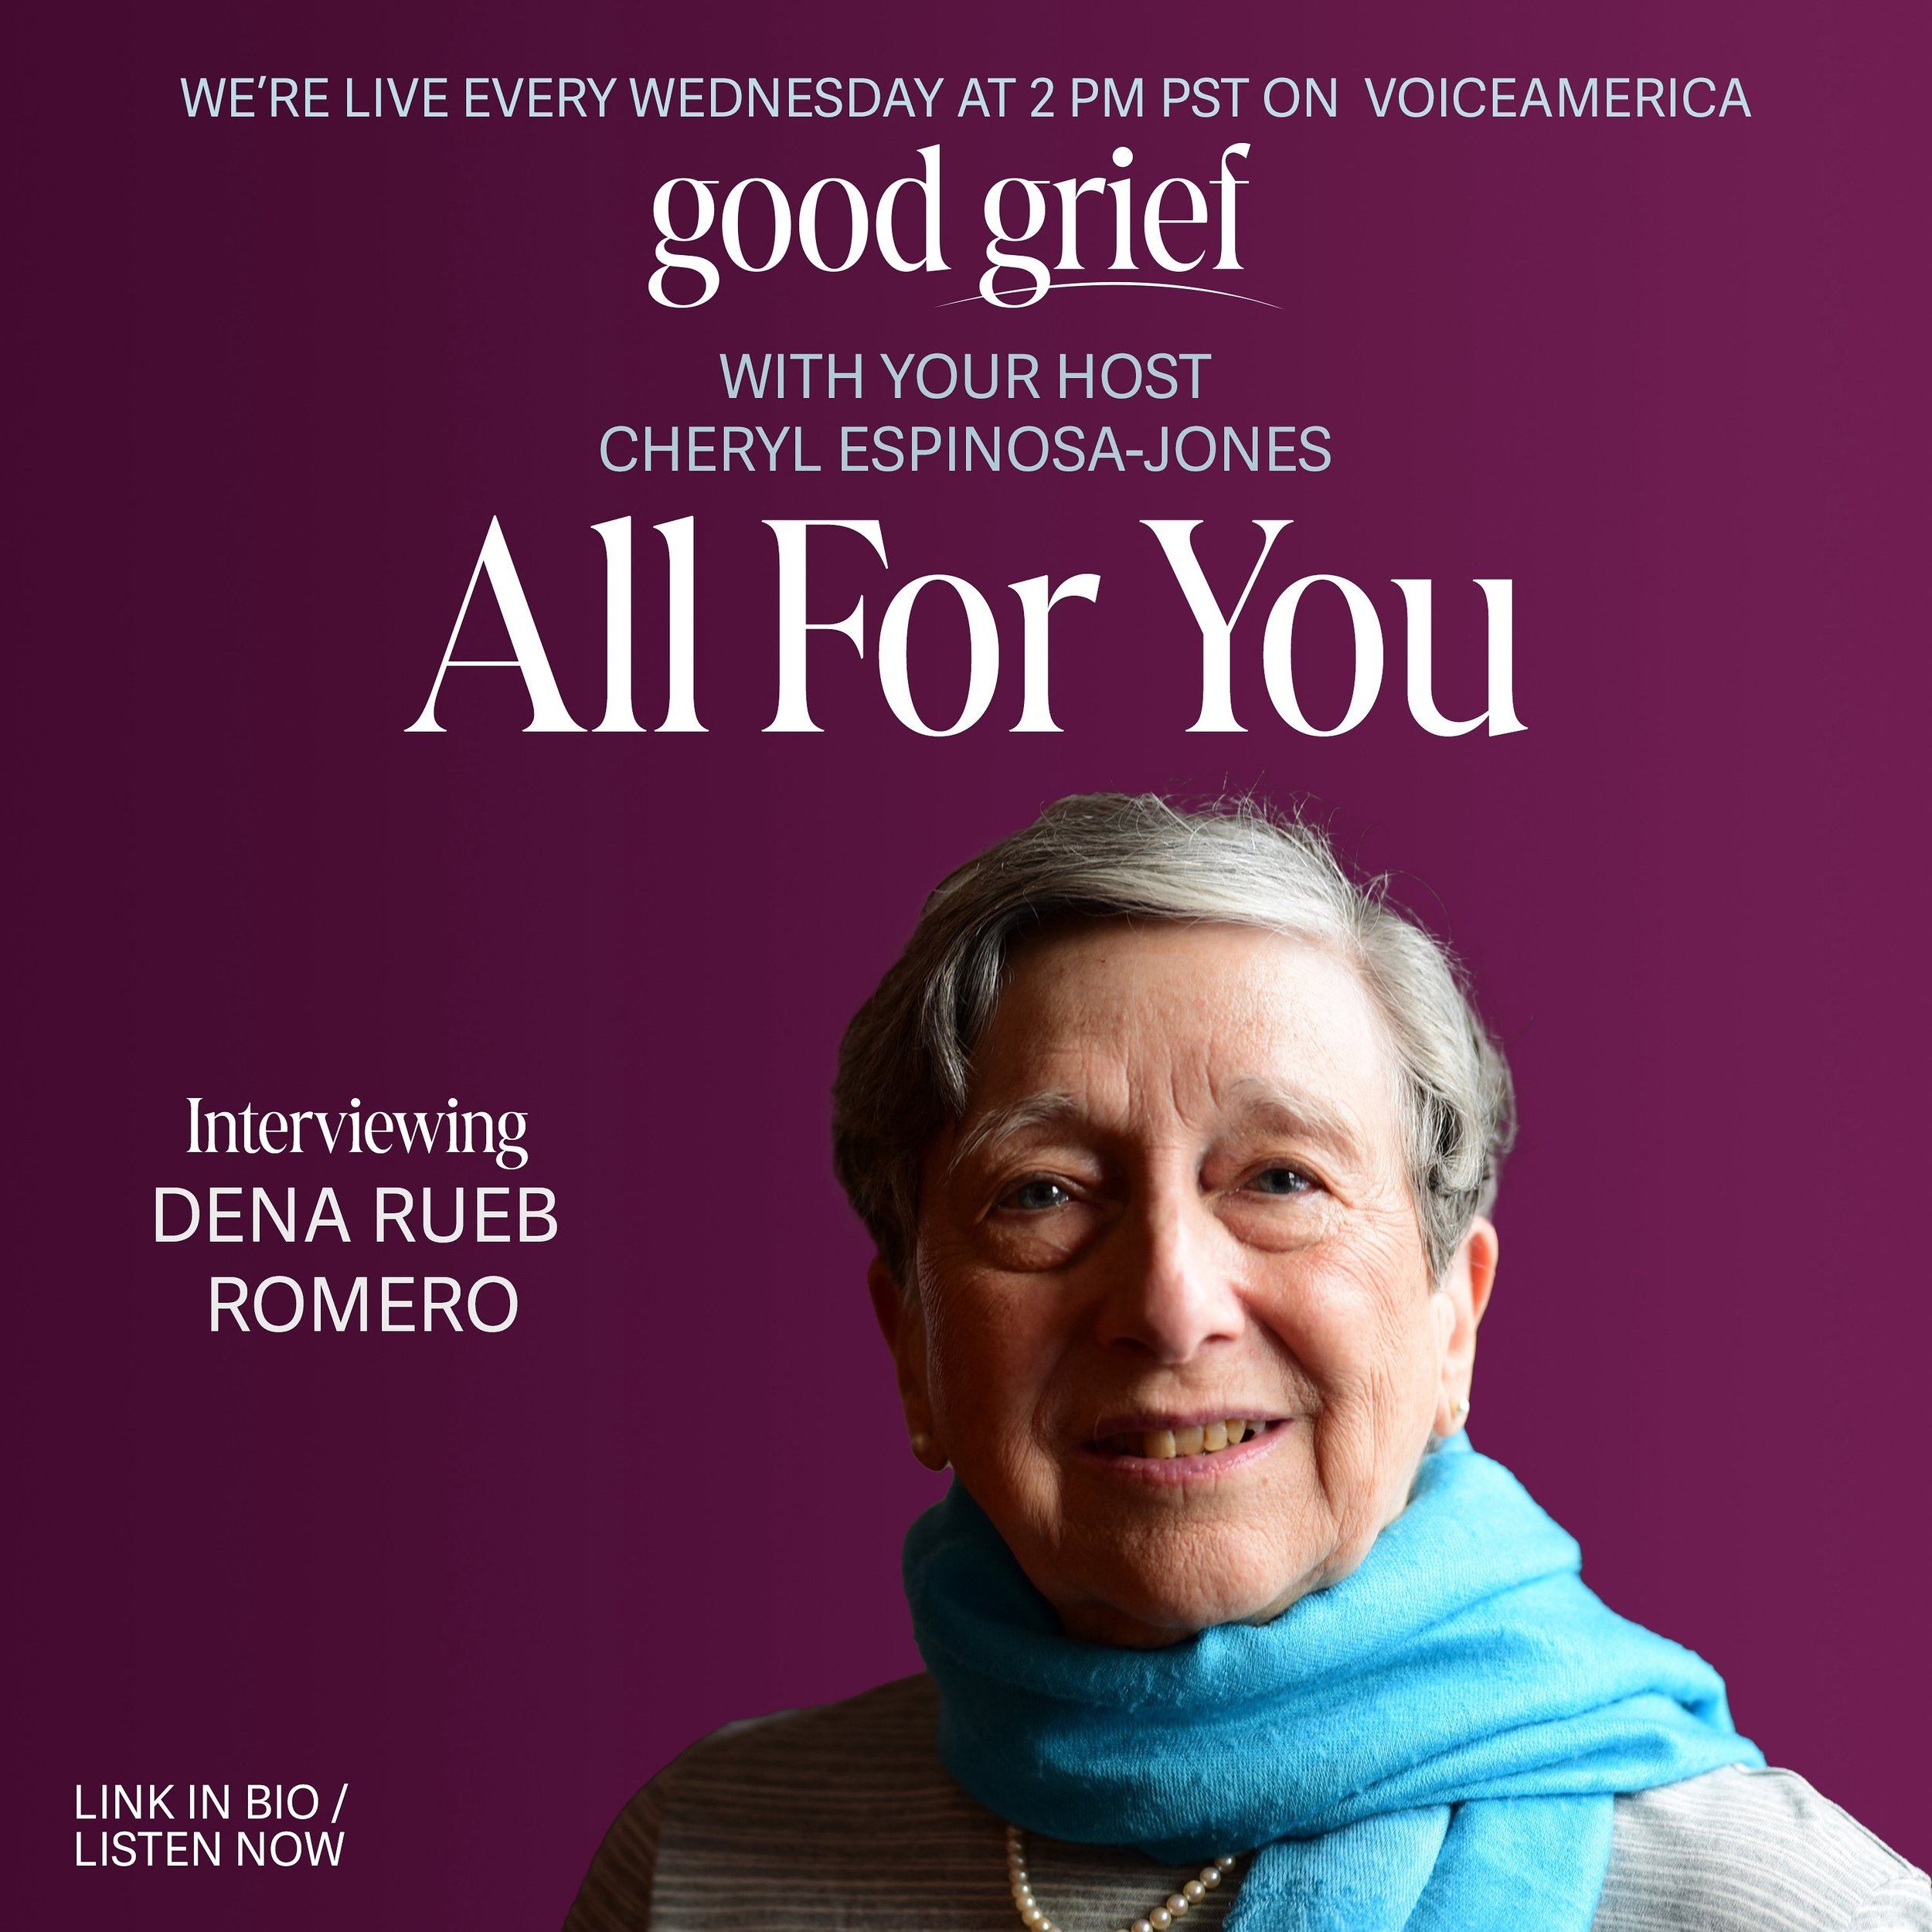 Set a reminder to join us at 2 Pacific on @voiceamericatalkradio with Dena Rueb Romero! The book is beautiful and I can&rsquo;t wait to spend the hour with her. Link in bio. #goodgriefwithcheryl